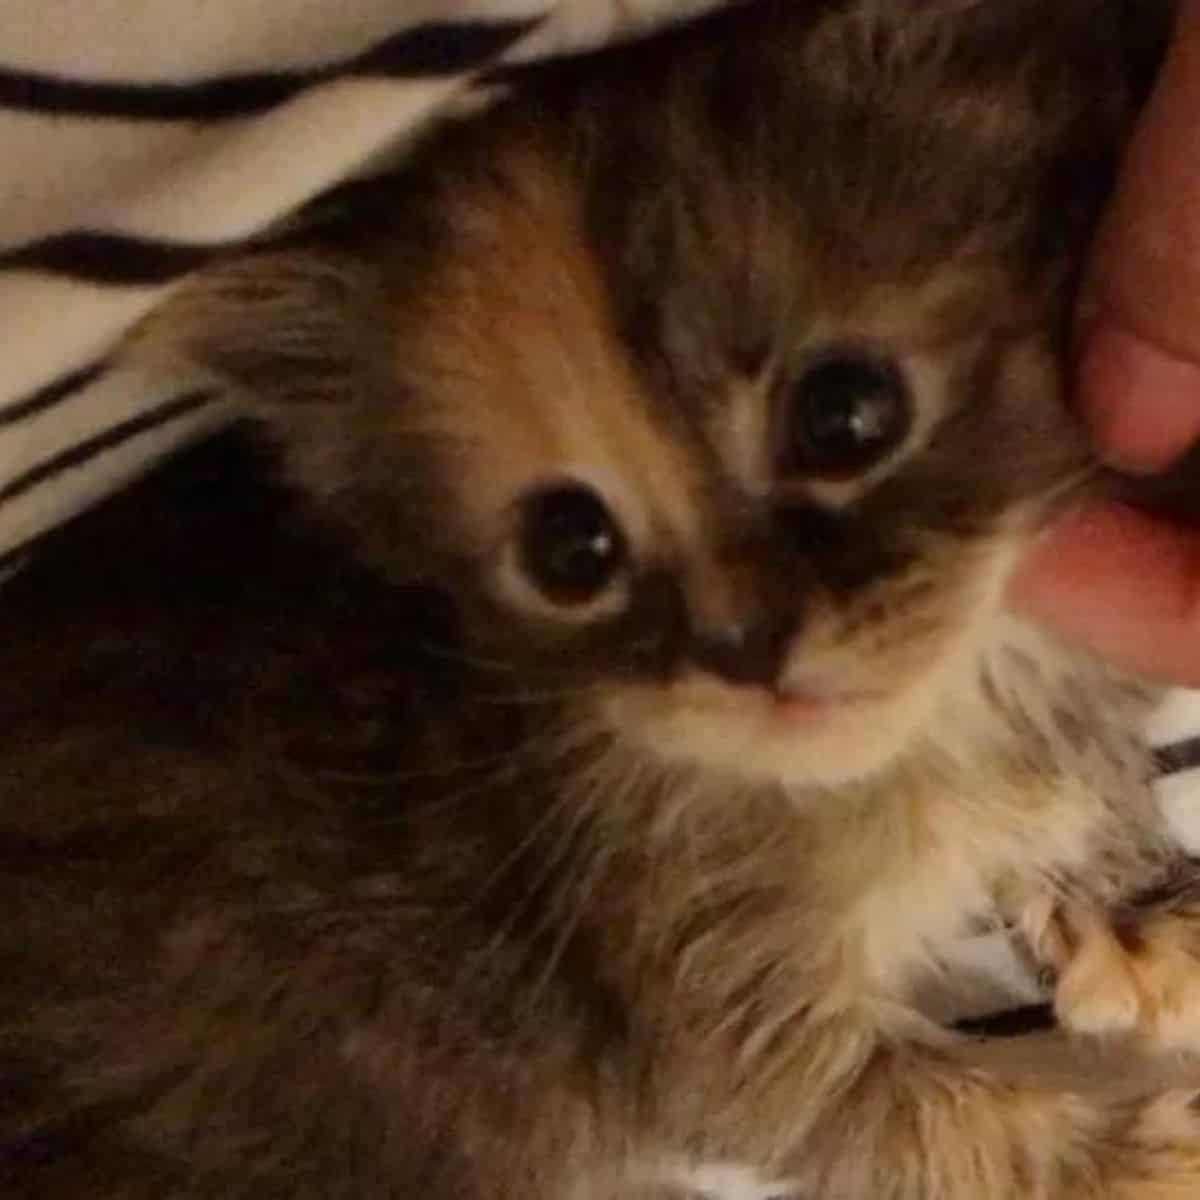 close-up photo of the kitten